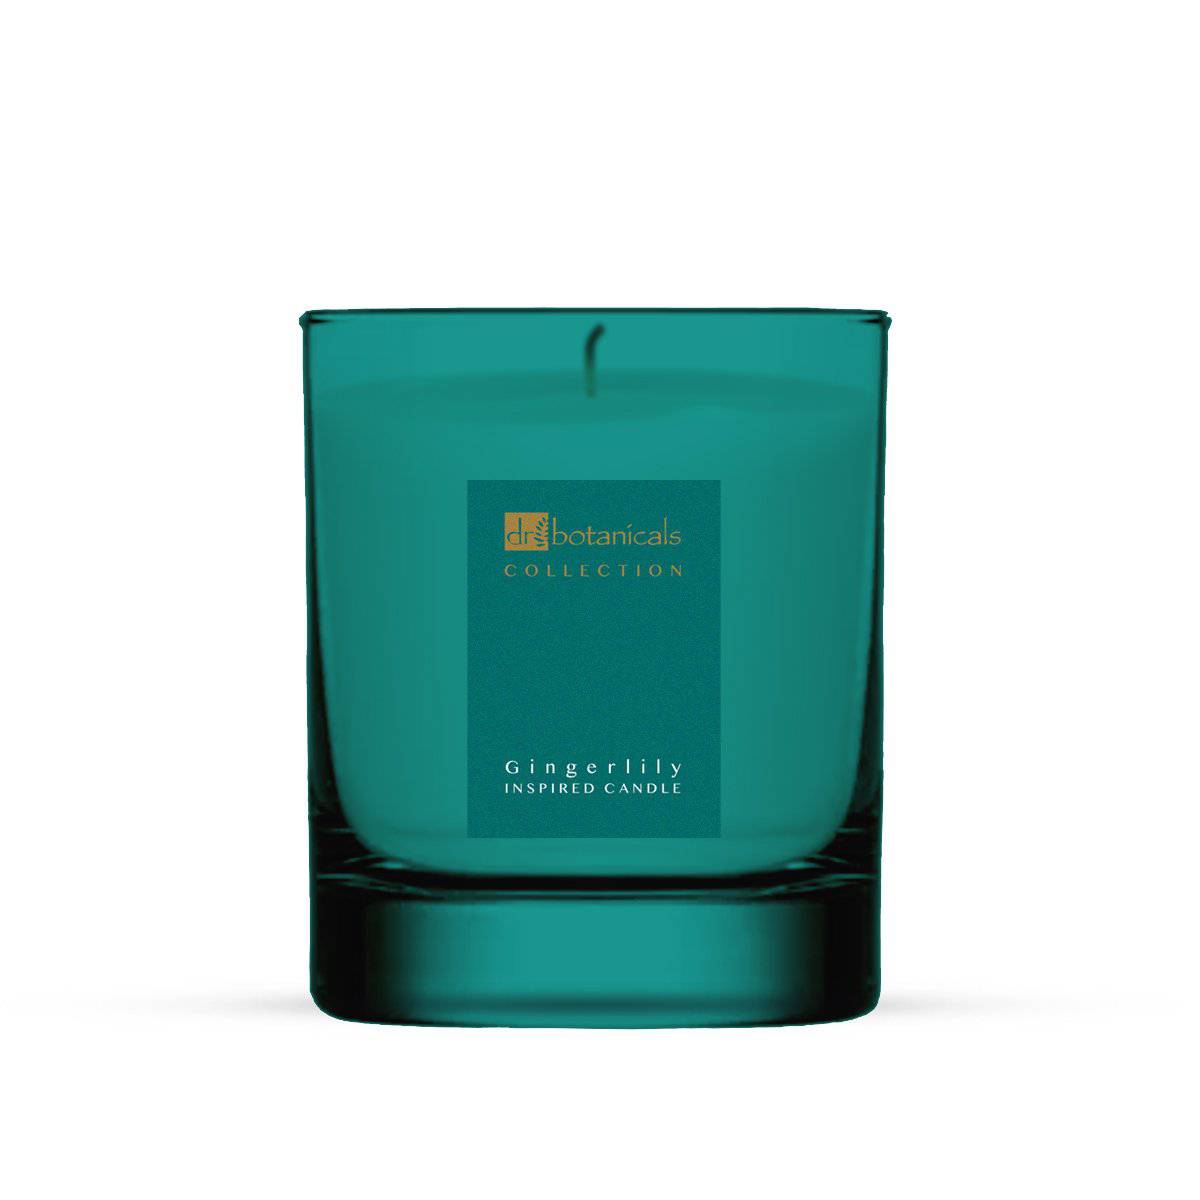 Gingerlily Inspired Candle 200g